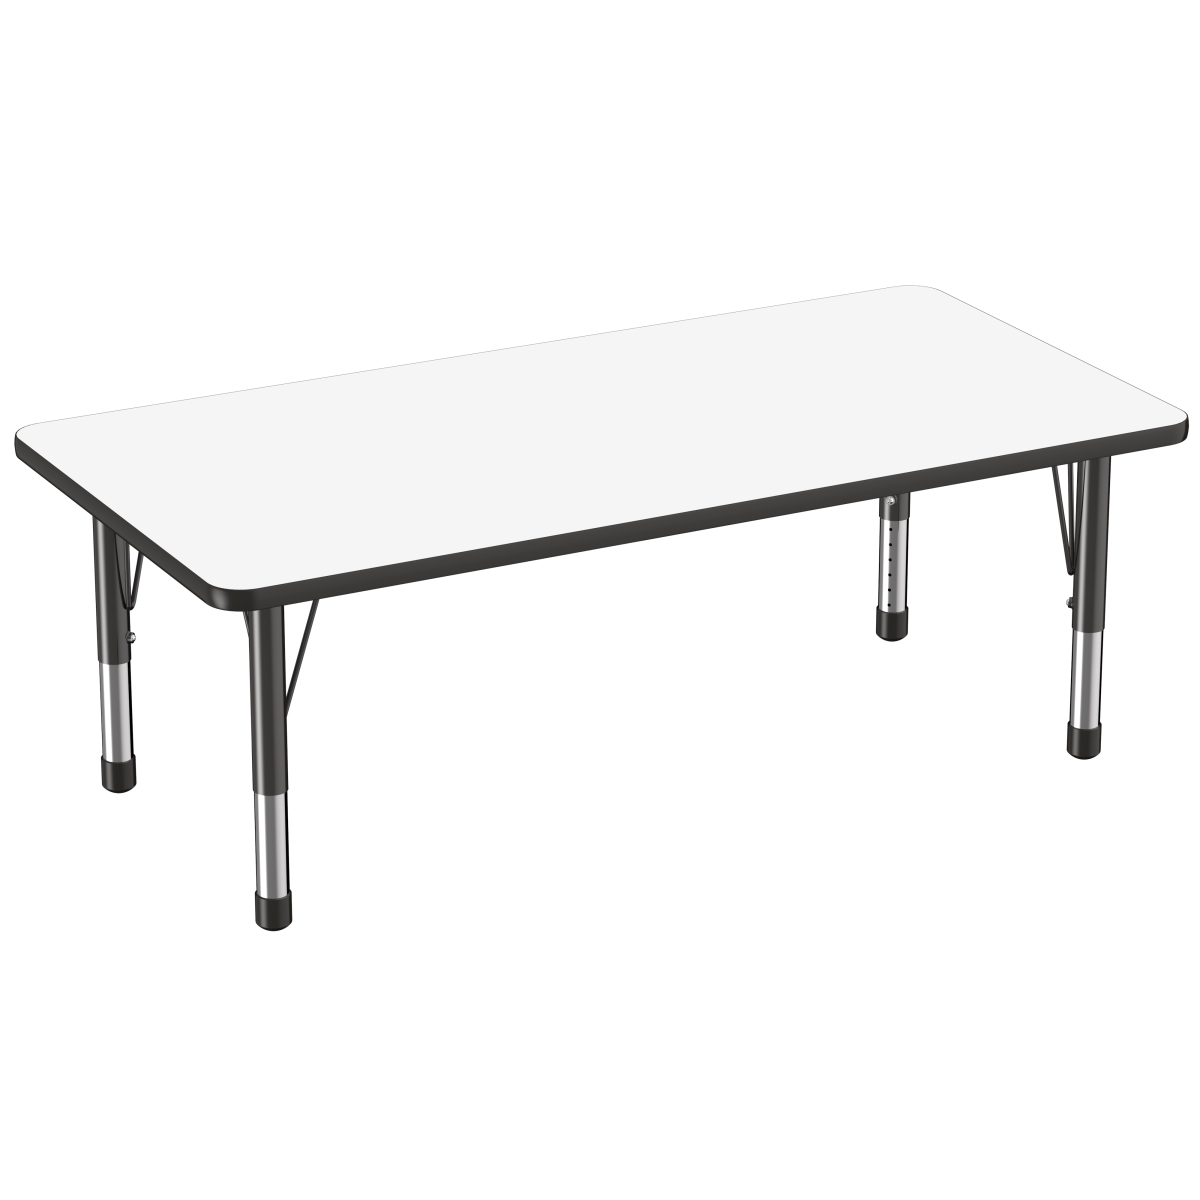 10178-debk 30 X 60 In. Rectangle Dry-erase Adjustable Activity Table With Chunky Leg - Black